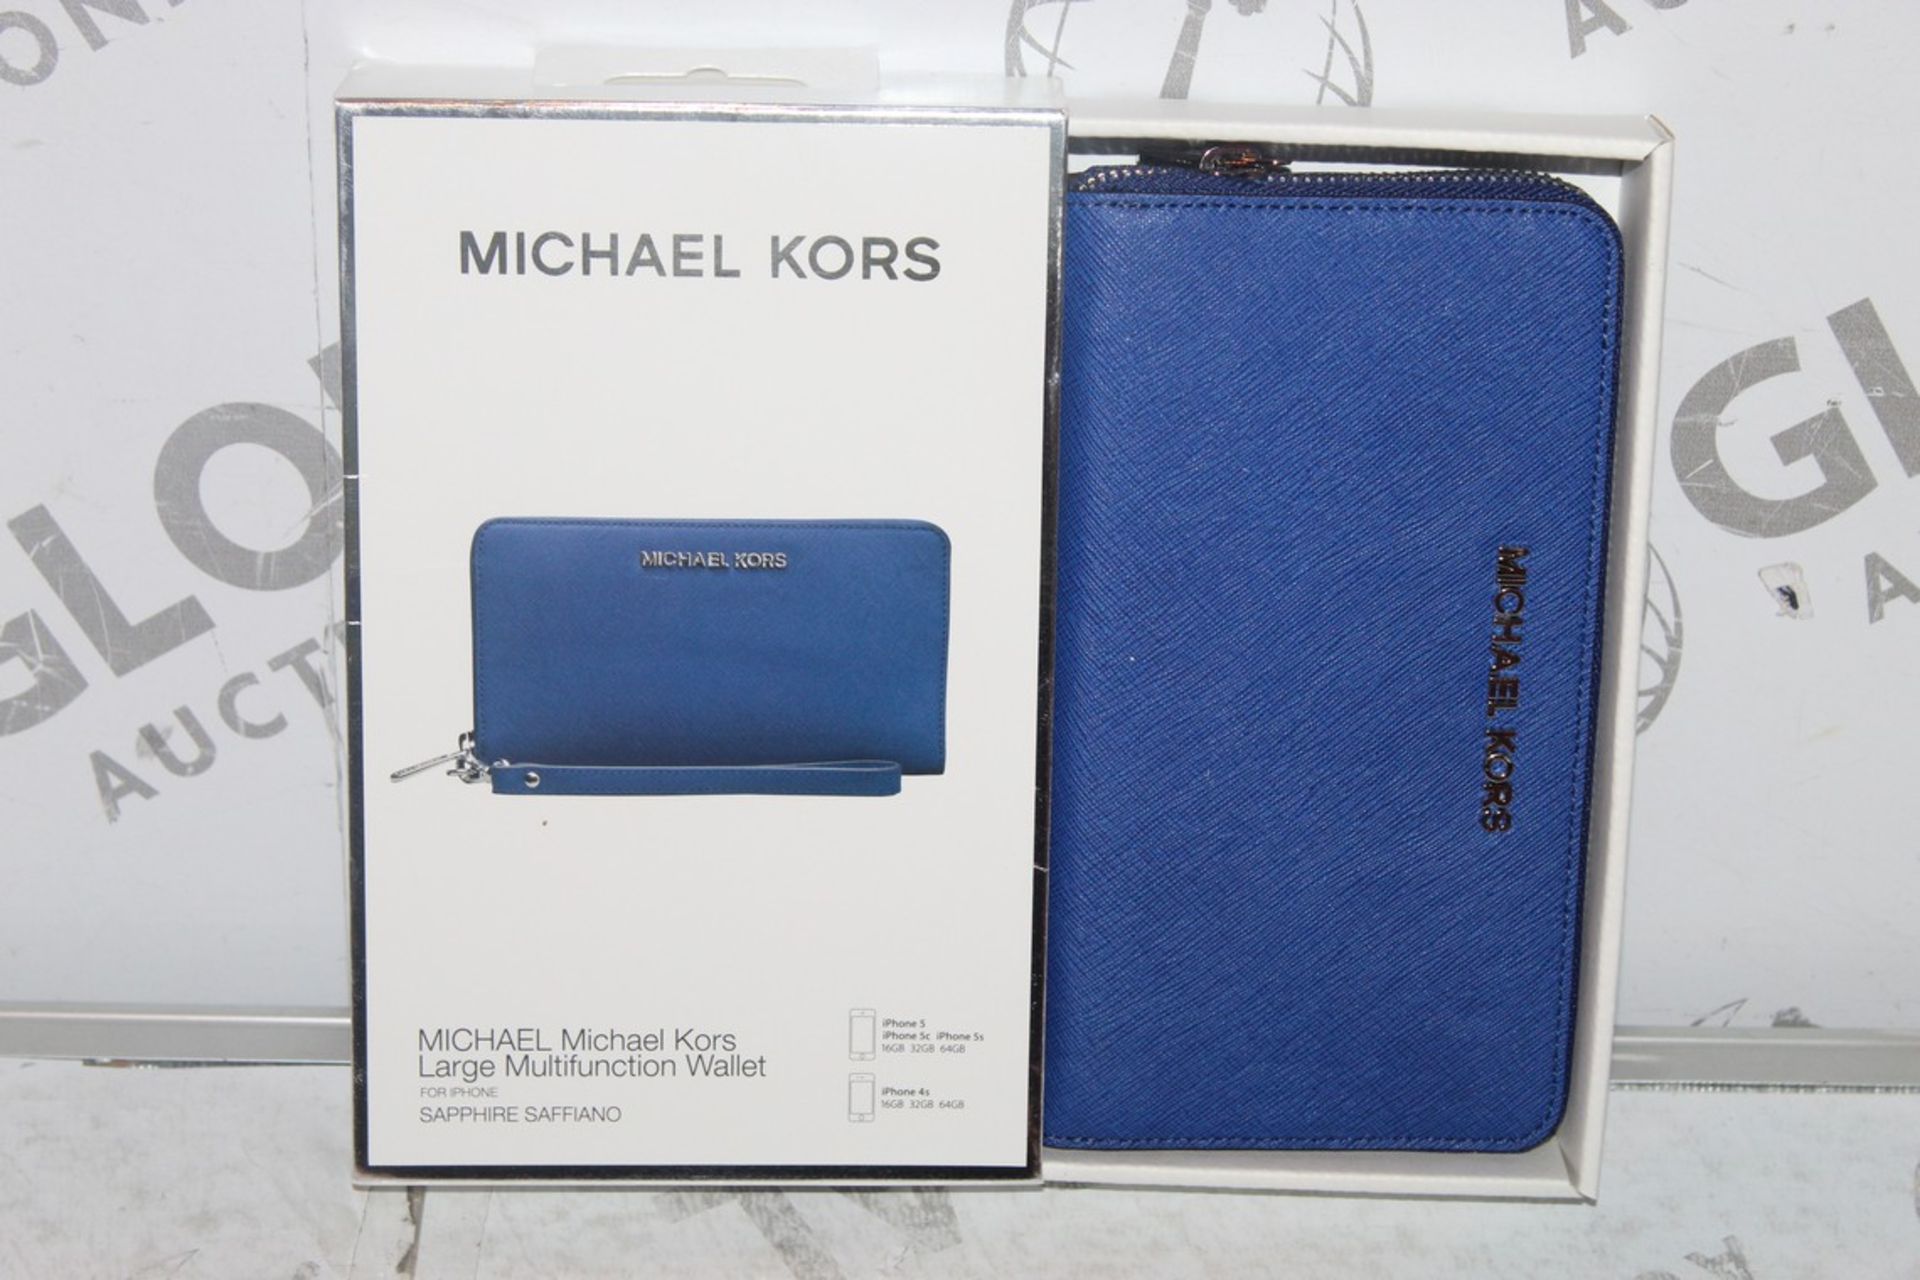 Lot to Contain 2 Brand New Michael Kors Large Multi Function Wallets in Navy Blue Combined RRP £60